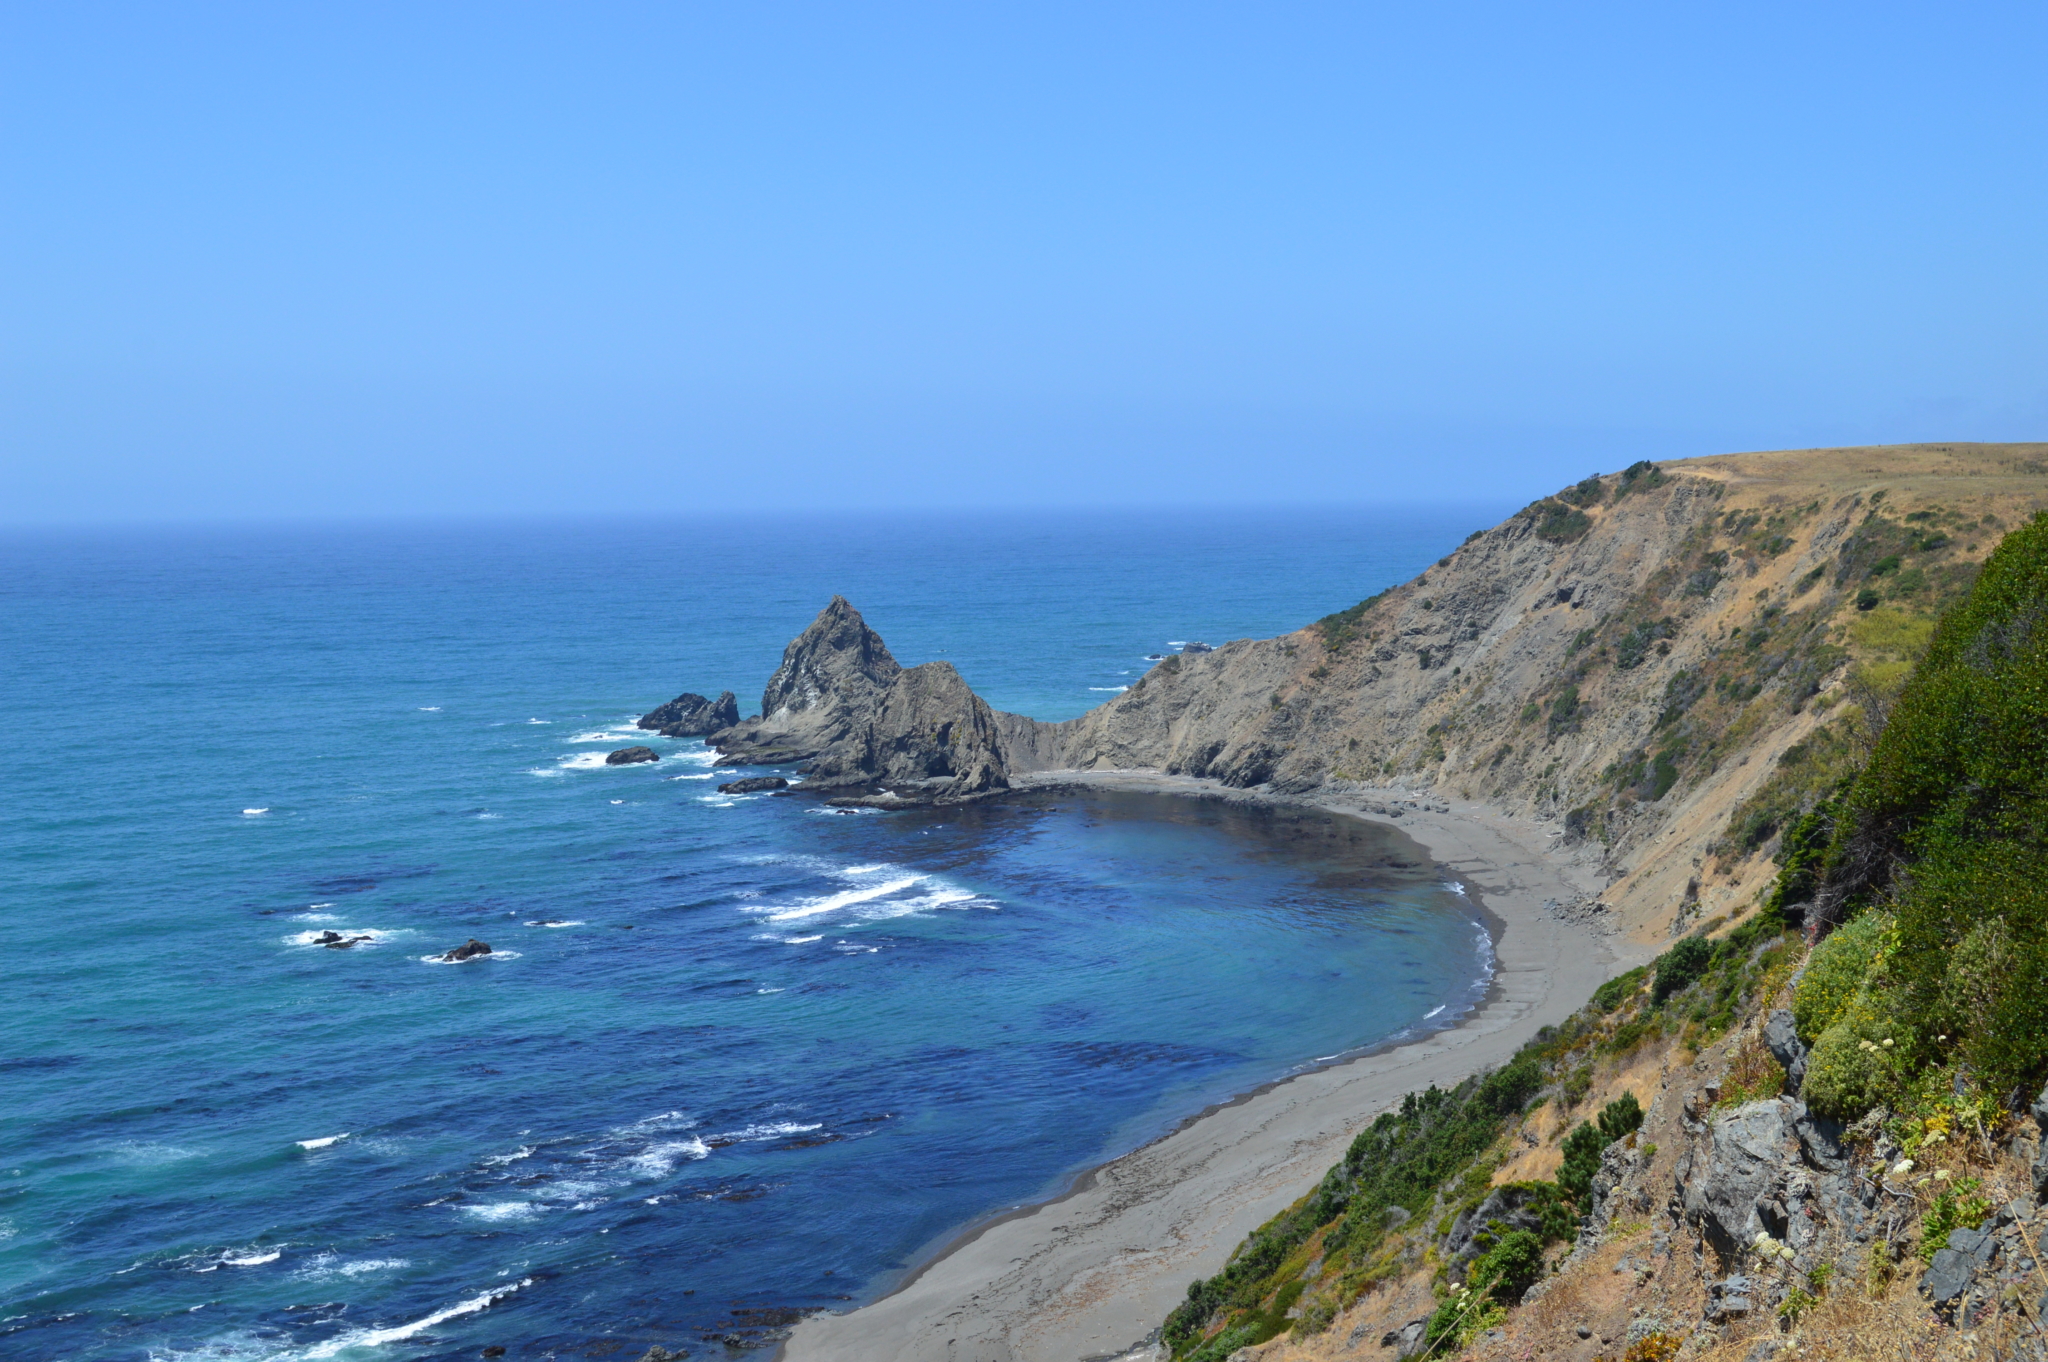 Ocean off of California with large rock outcrop sticking up out of water.